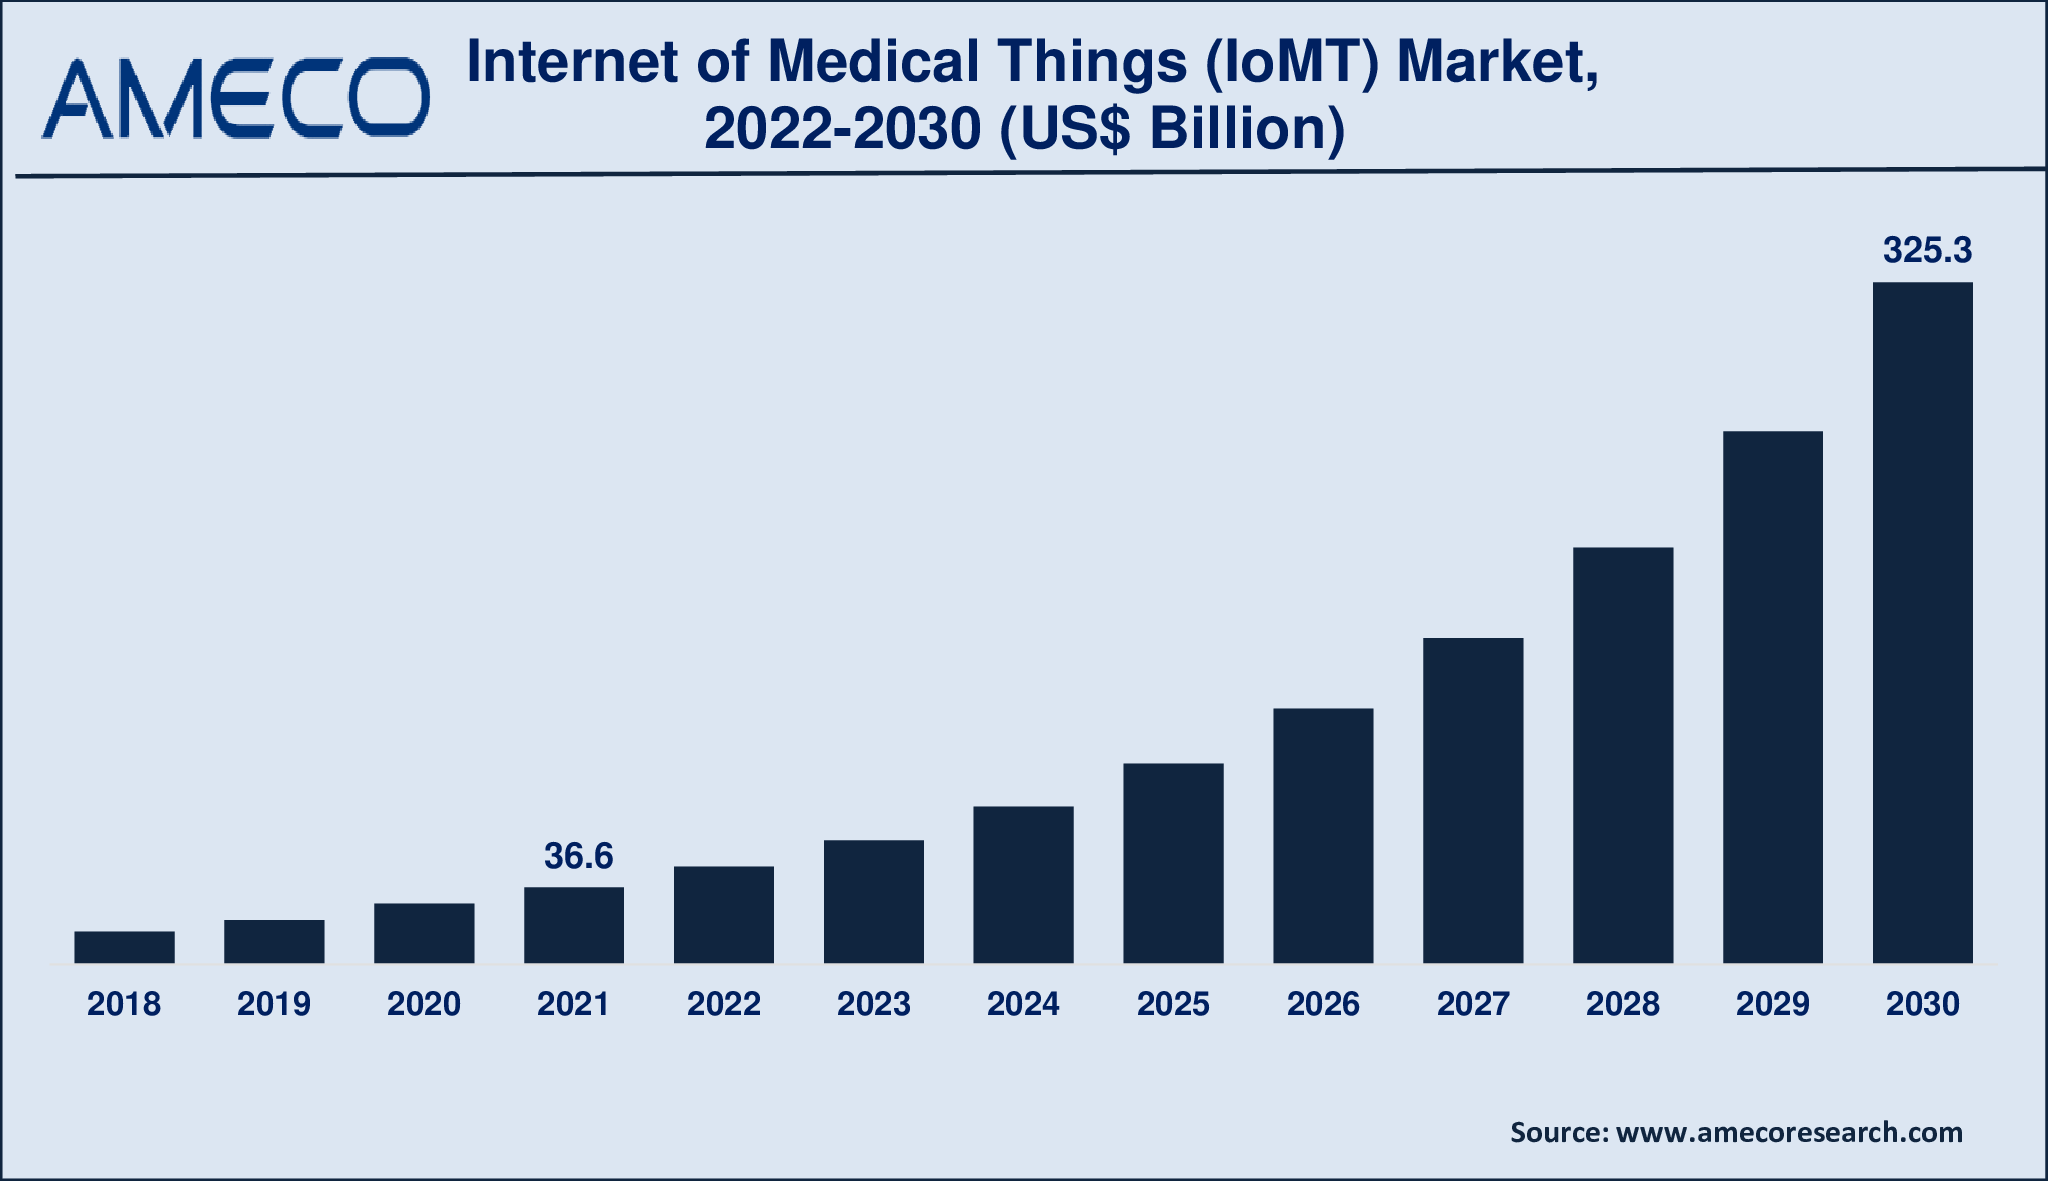 Internet of Medical Things (IoMT) Market Size, Share, Growth, Trends, and Forecast 2022-2030